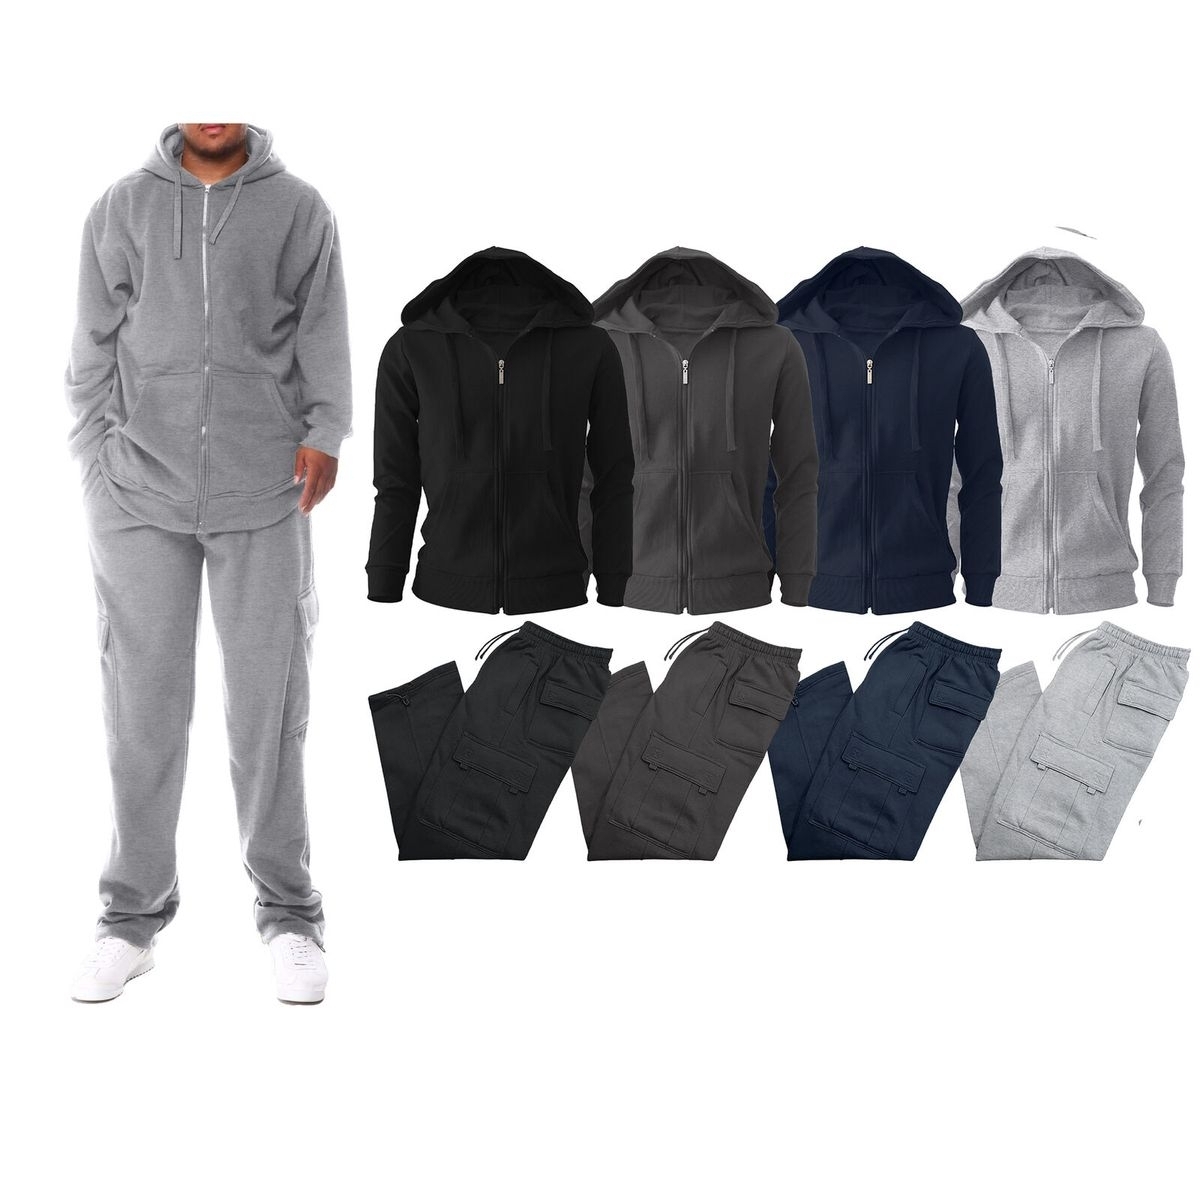 Men's Big & Tall Winter Warm Athletic Active Cozy Fleece Lined Multi-Pocket Full Zip Up Cargo Tracksuit - Navy, Large